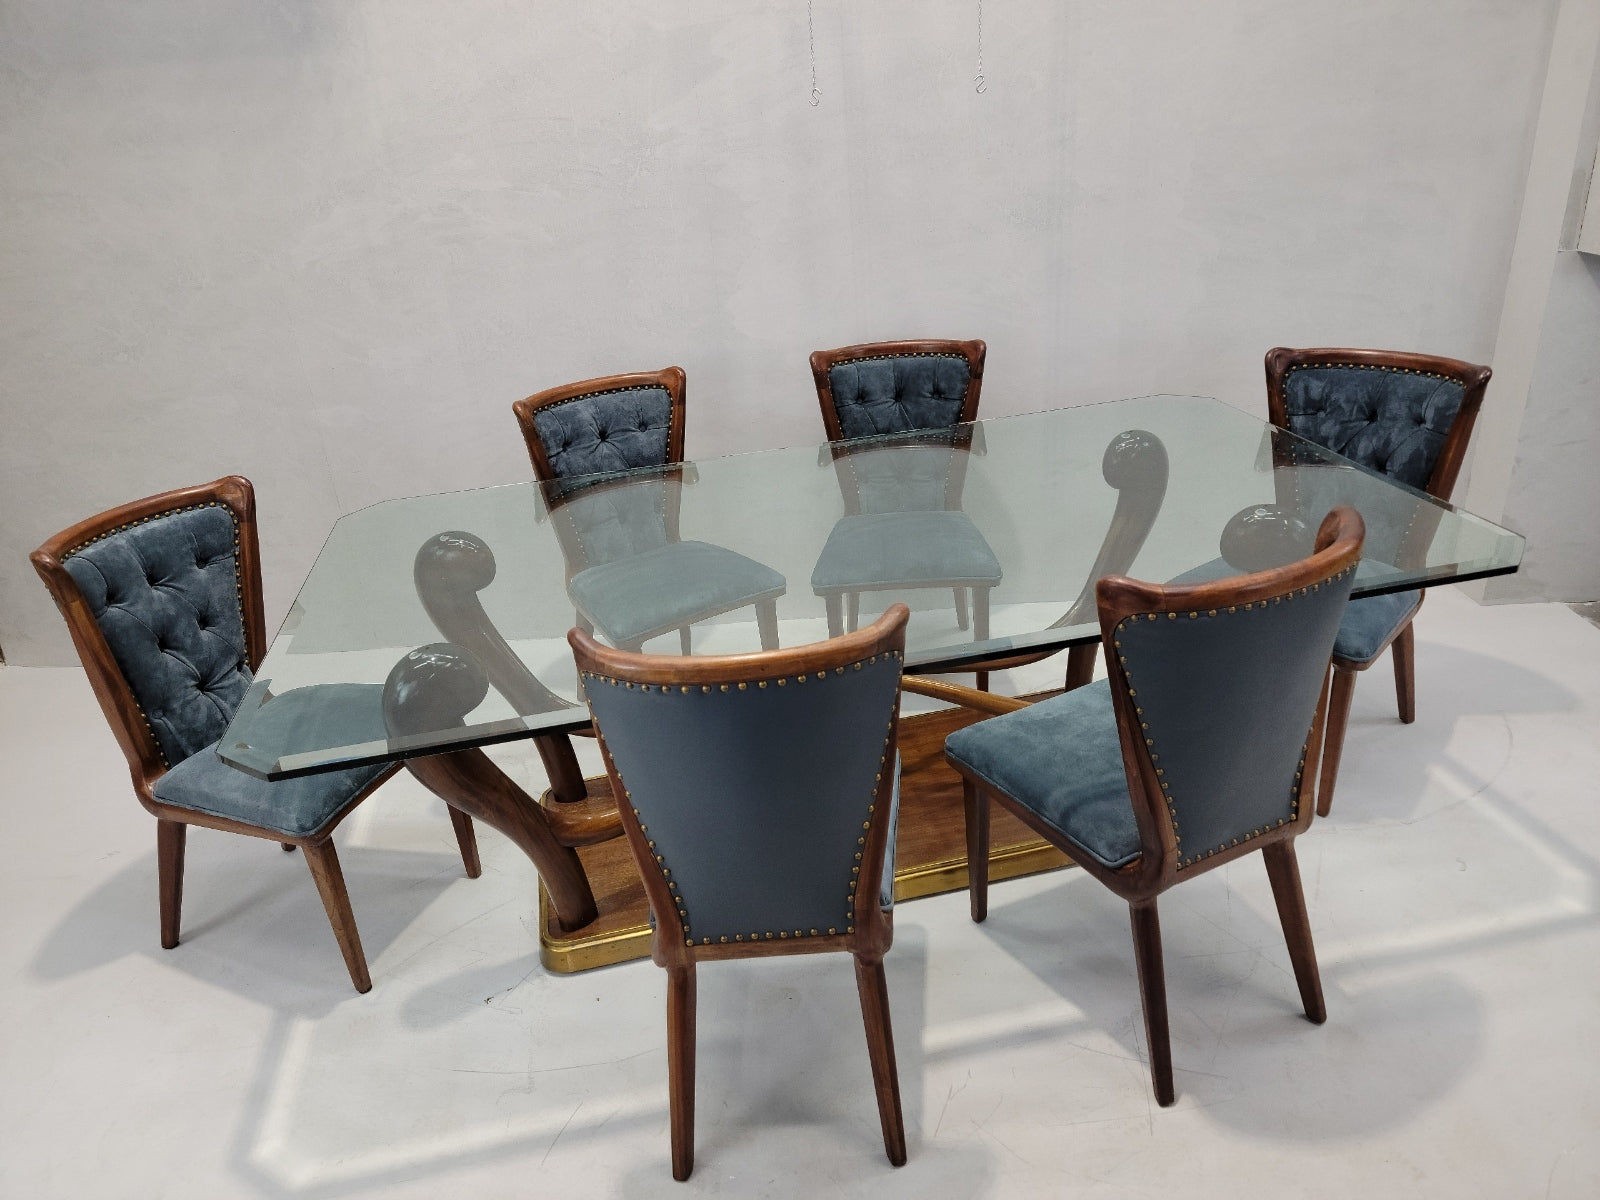 Vintage Italian Art Deco Sculptural Curved Back Dining Chairs Newly Upholstered in a Holly Hunt Blue Suede - Set of 6